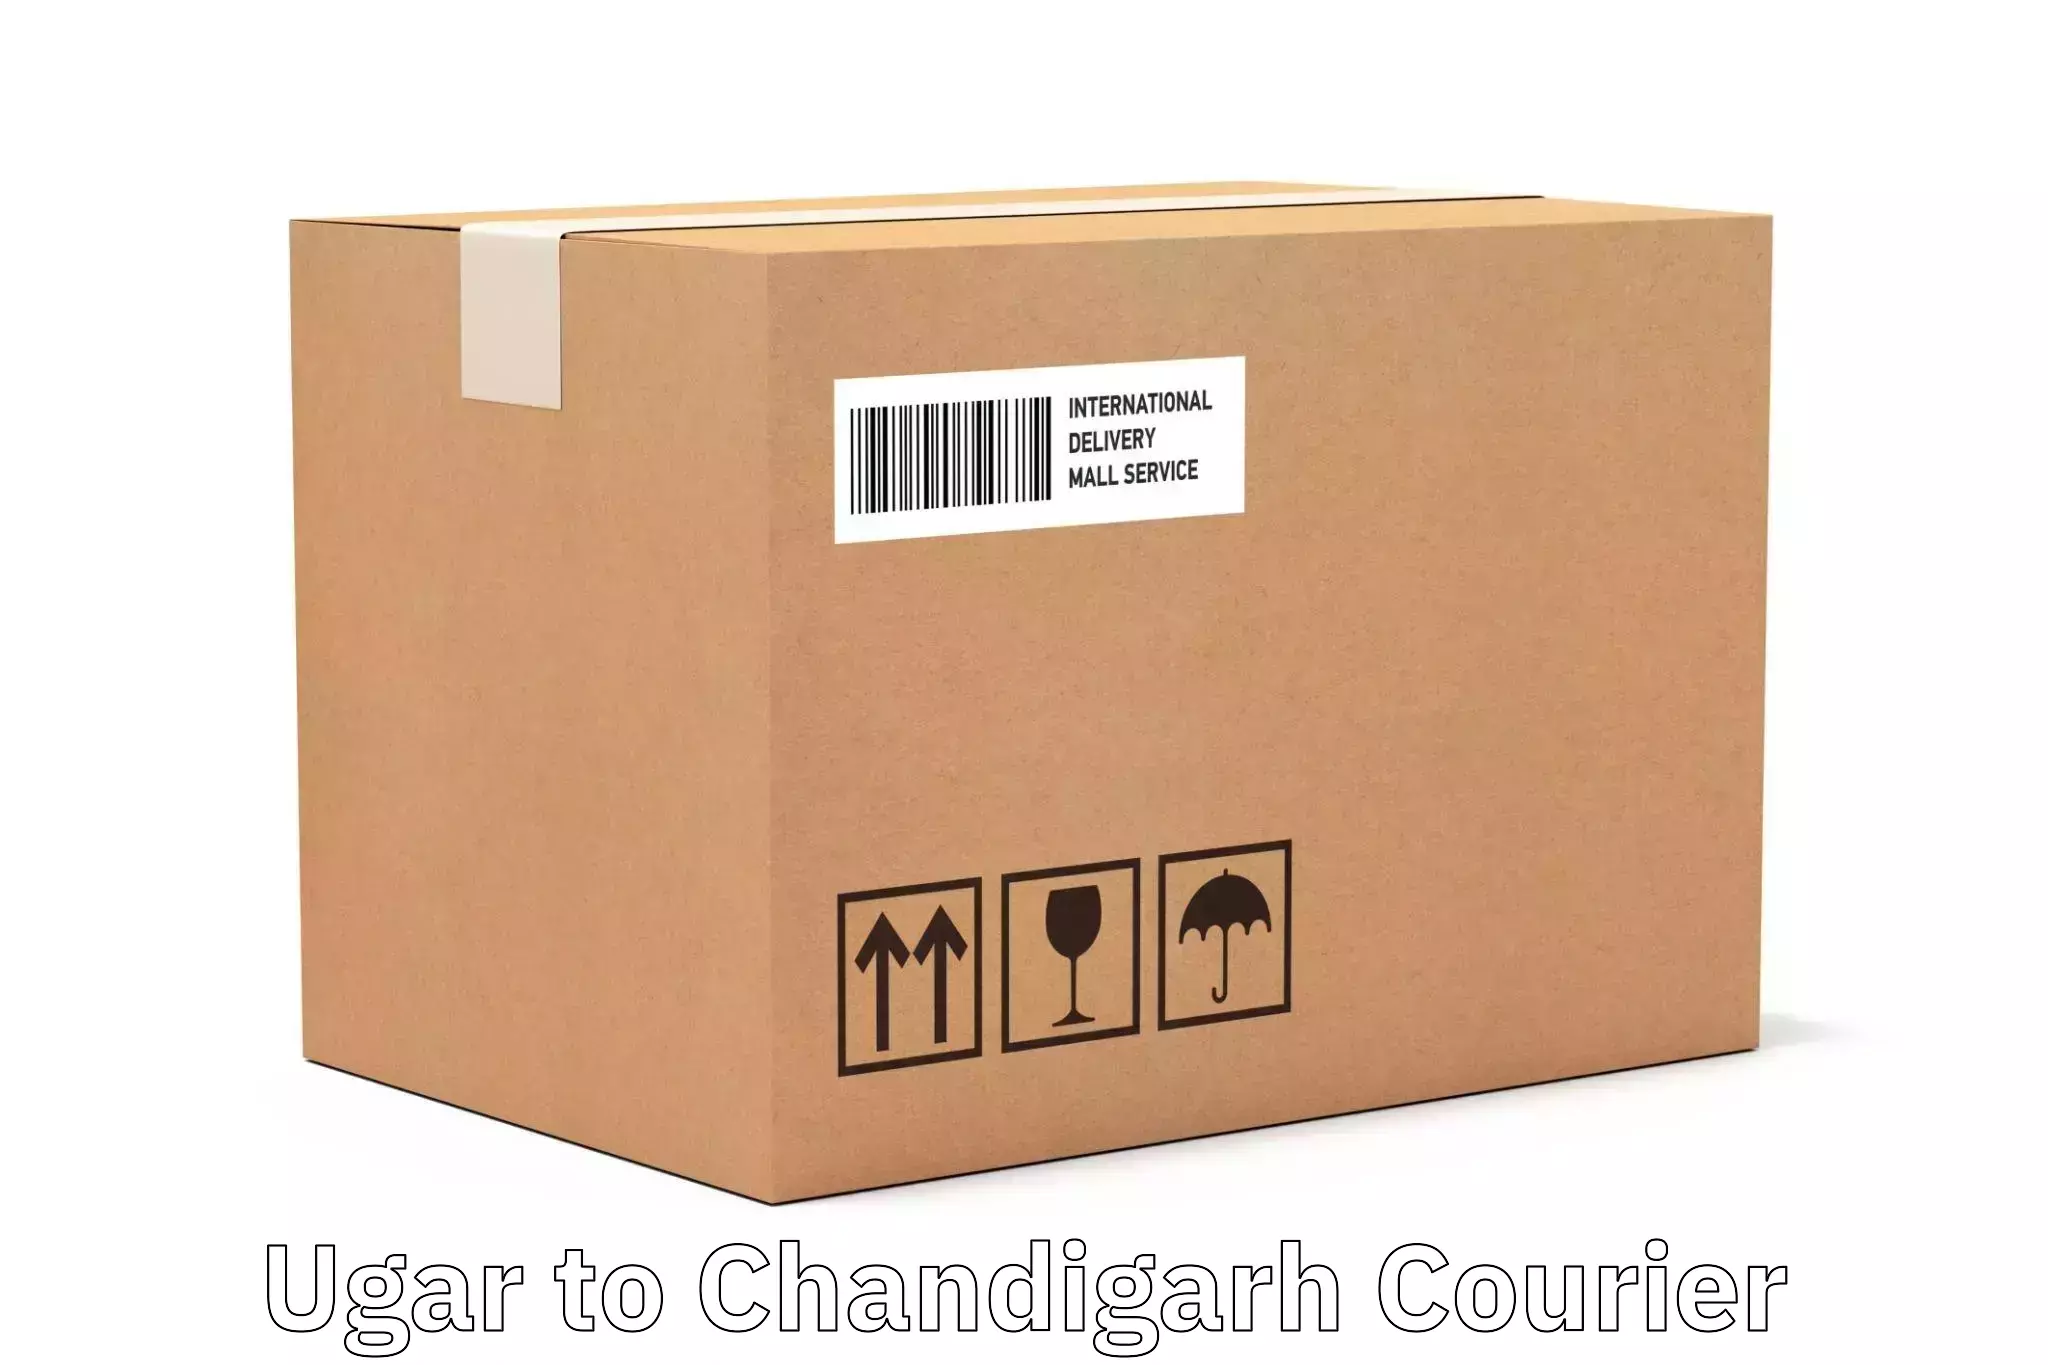 On-demand shipping options in Ugar to Chandigarh